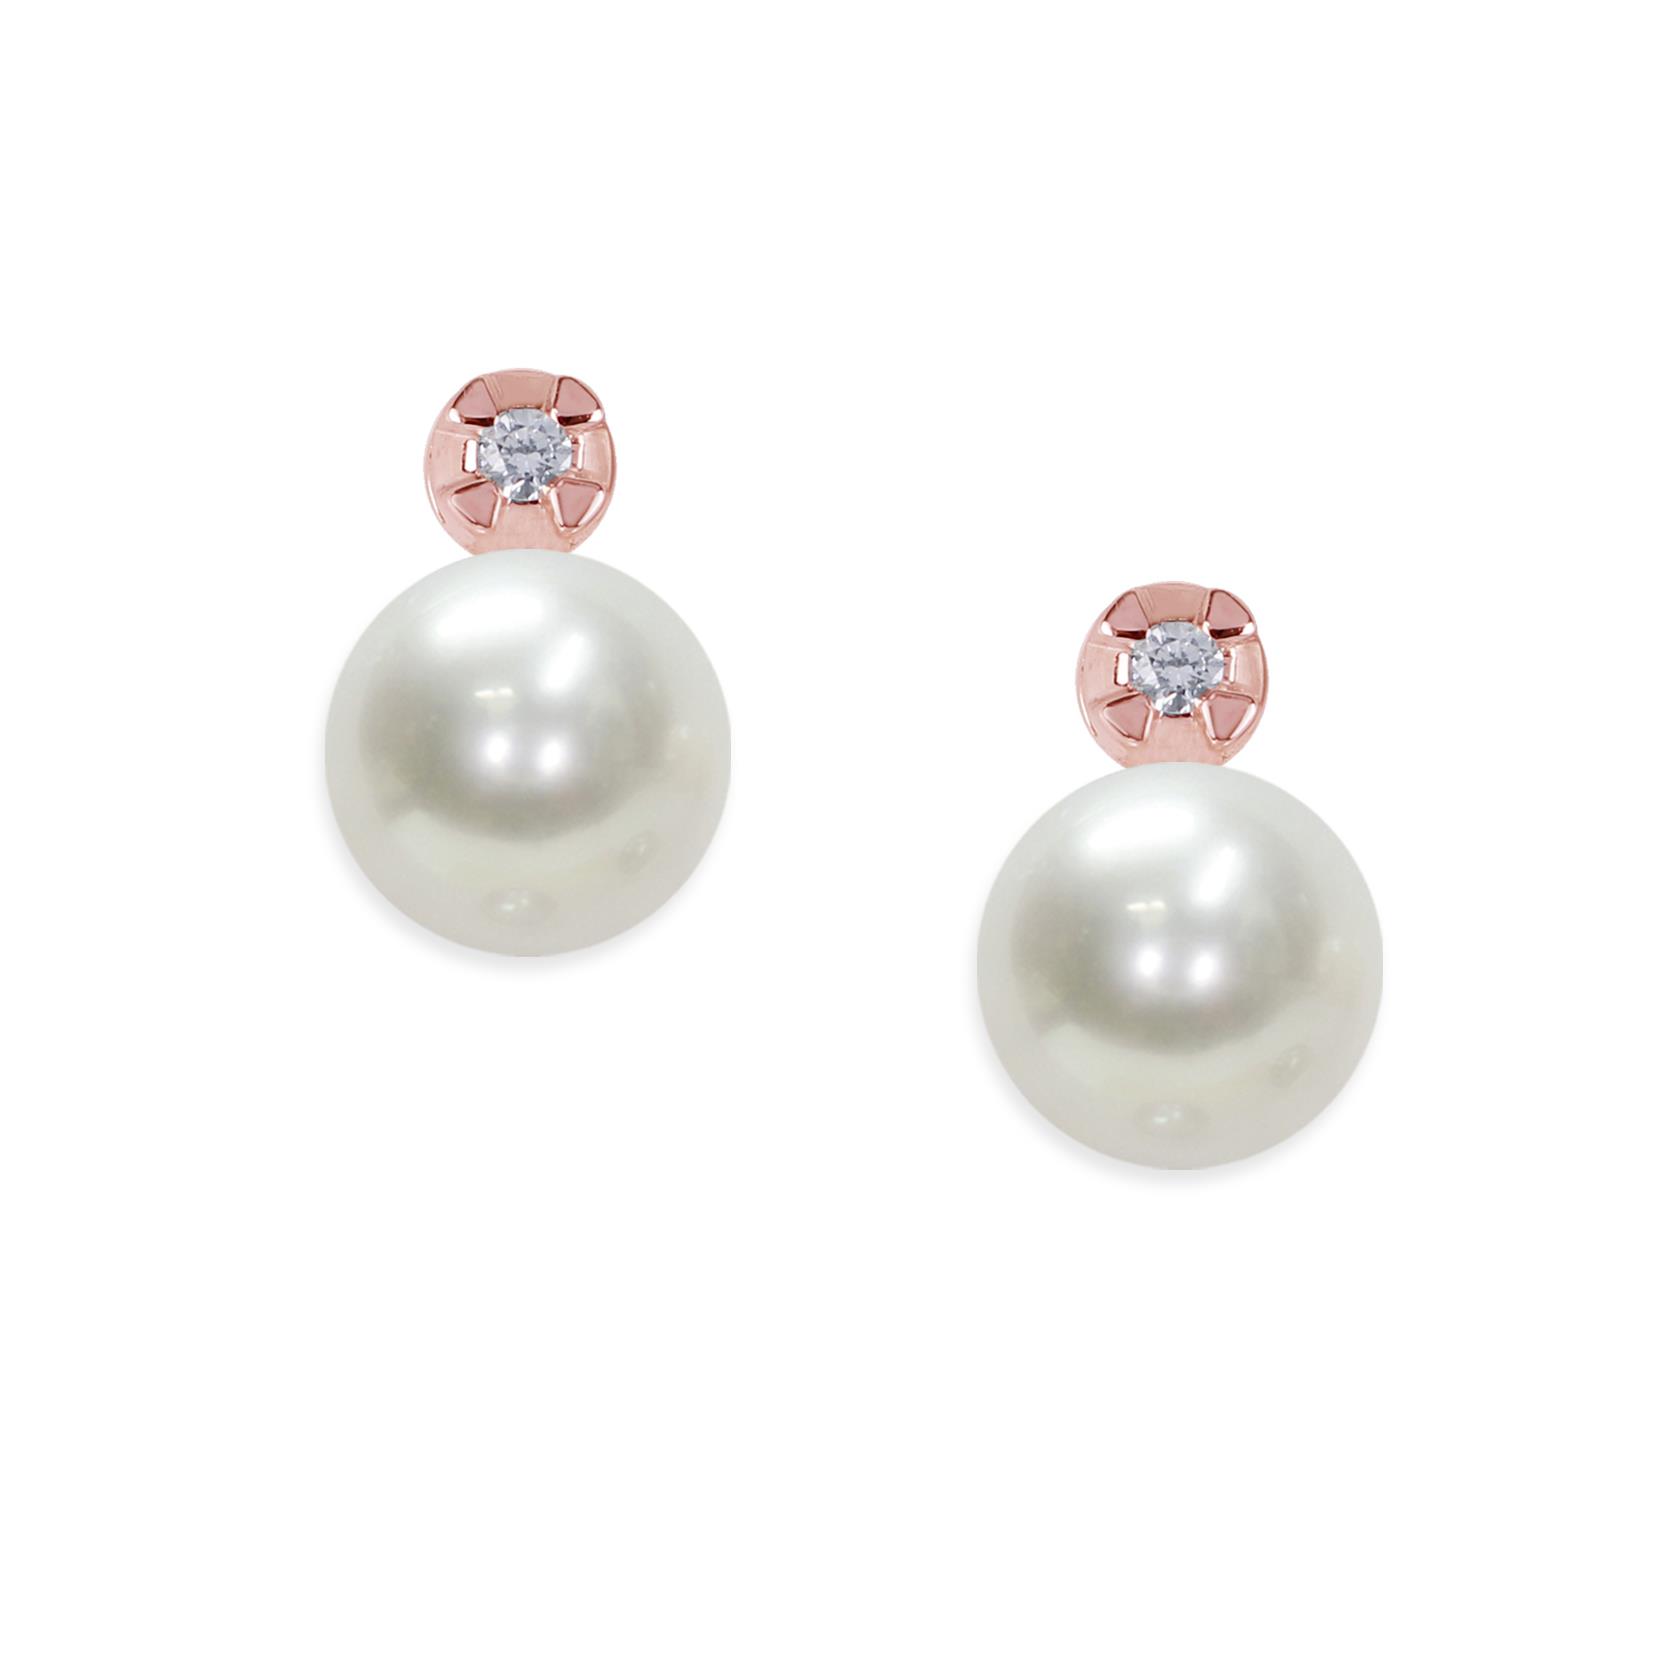 Rose gold earrings with pearl and diamonds - MAYUMI